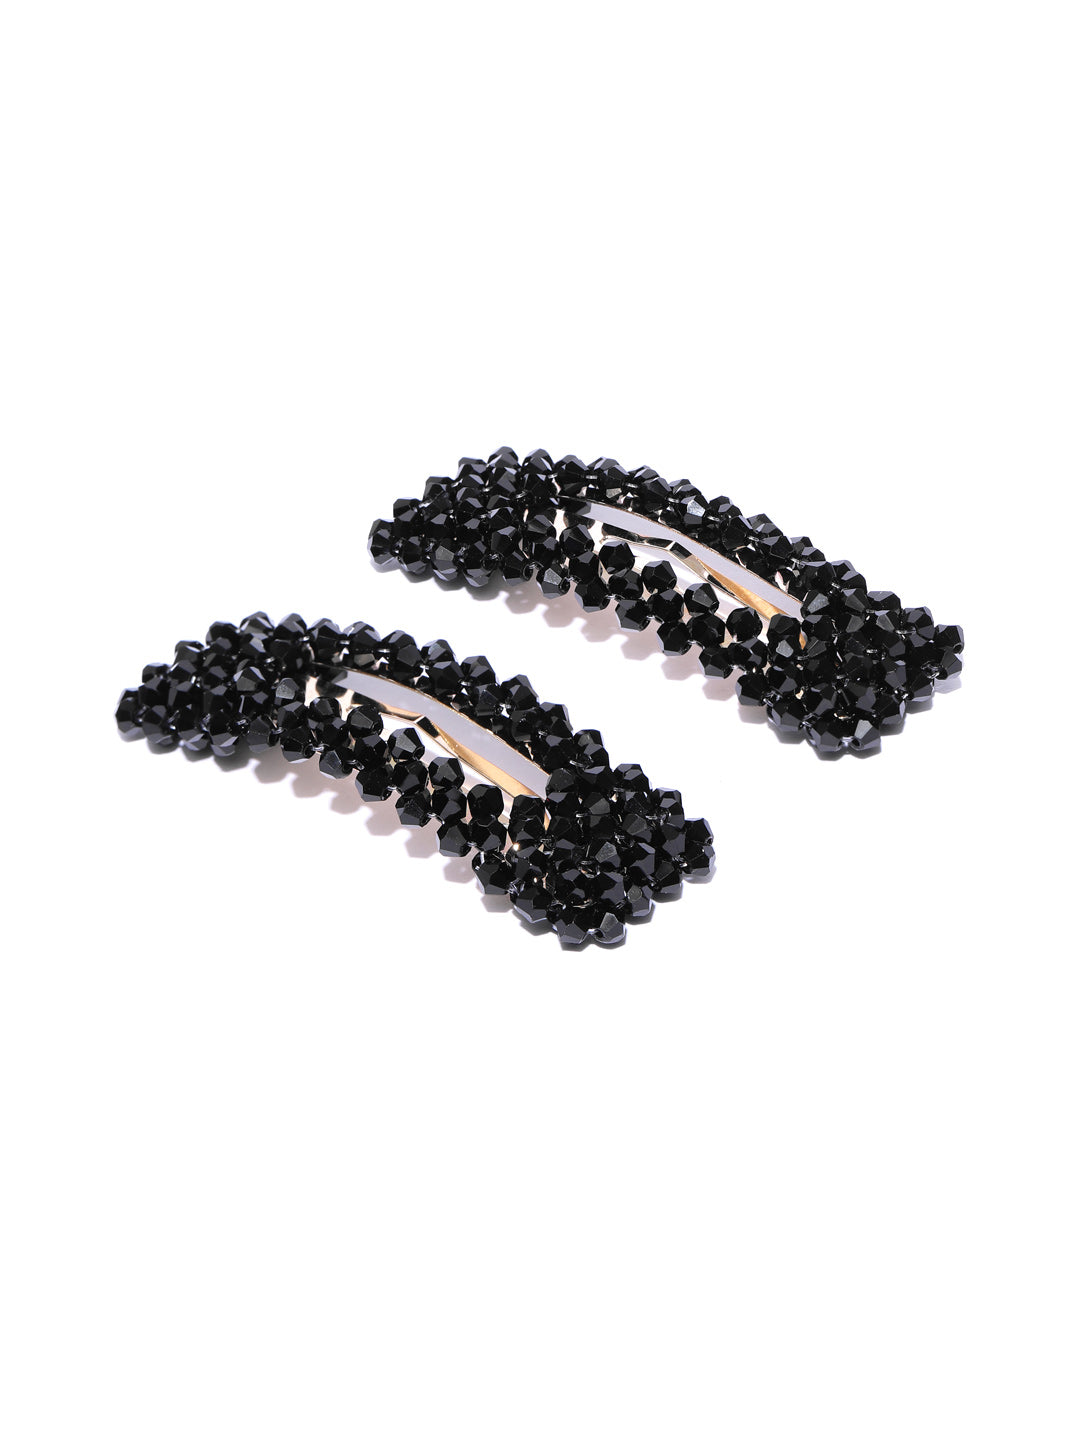 Blueberry set of 2 black crystal beads detailing hair pins